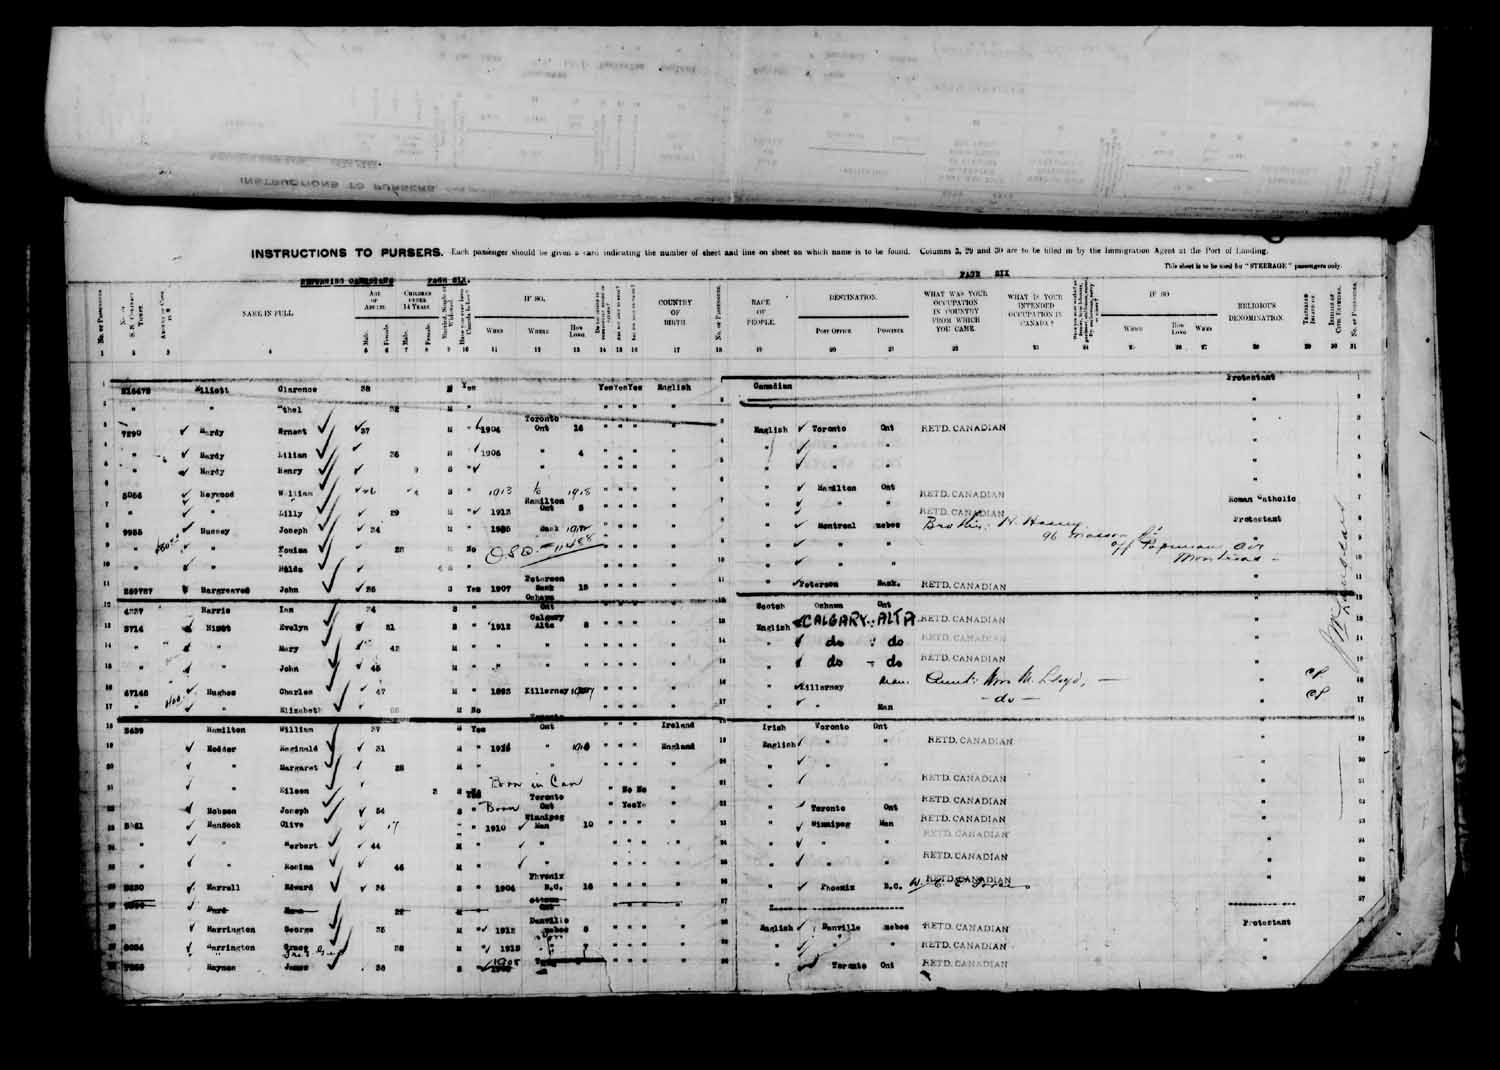 Digitized page of Passenger Lists for Image No.: e003610633